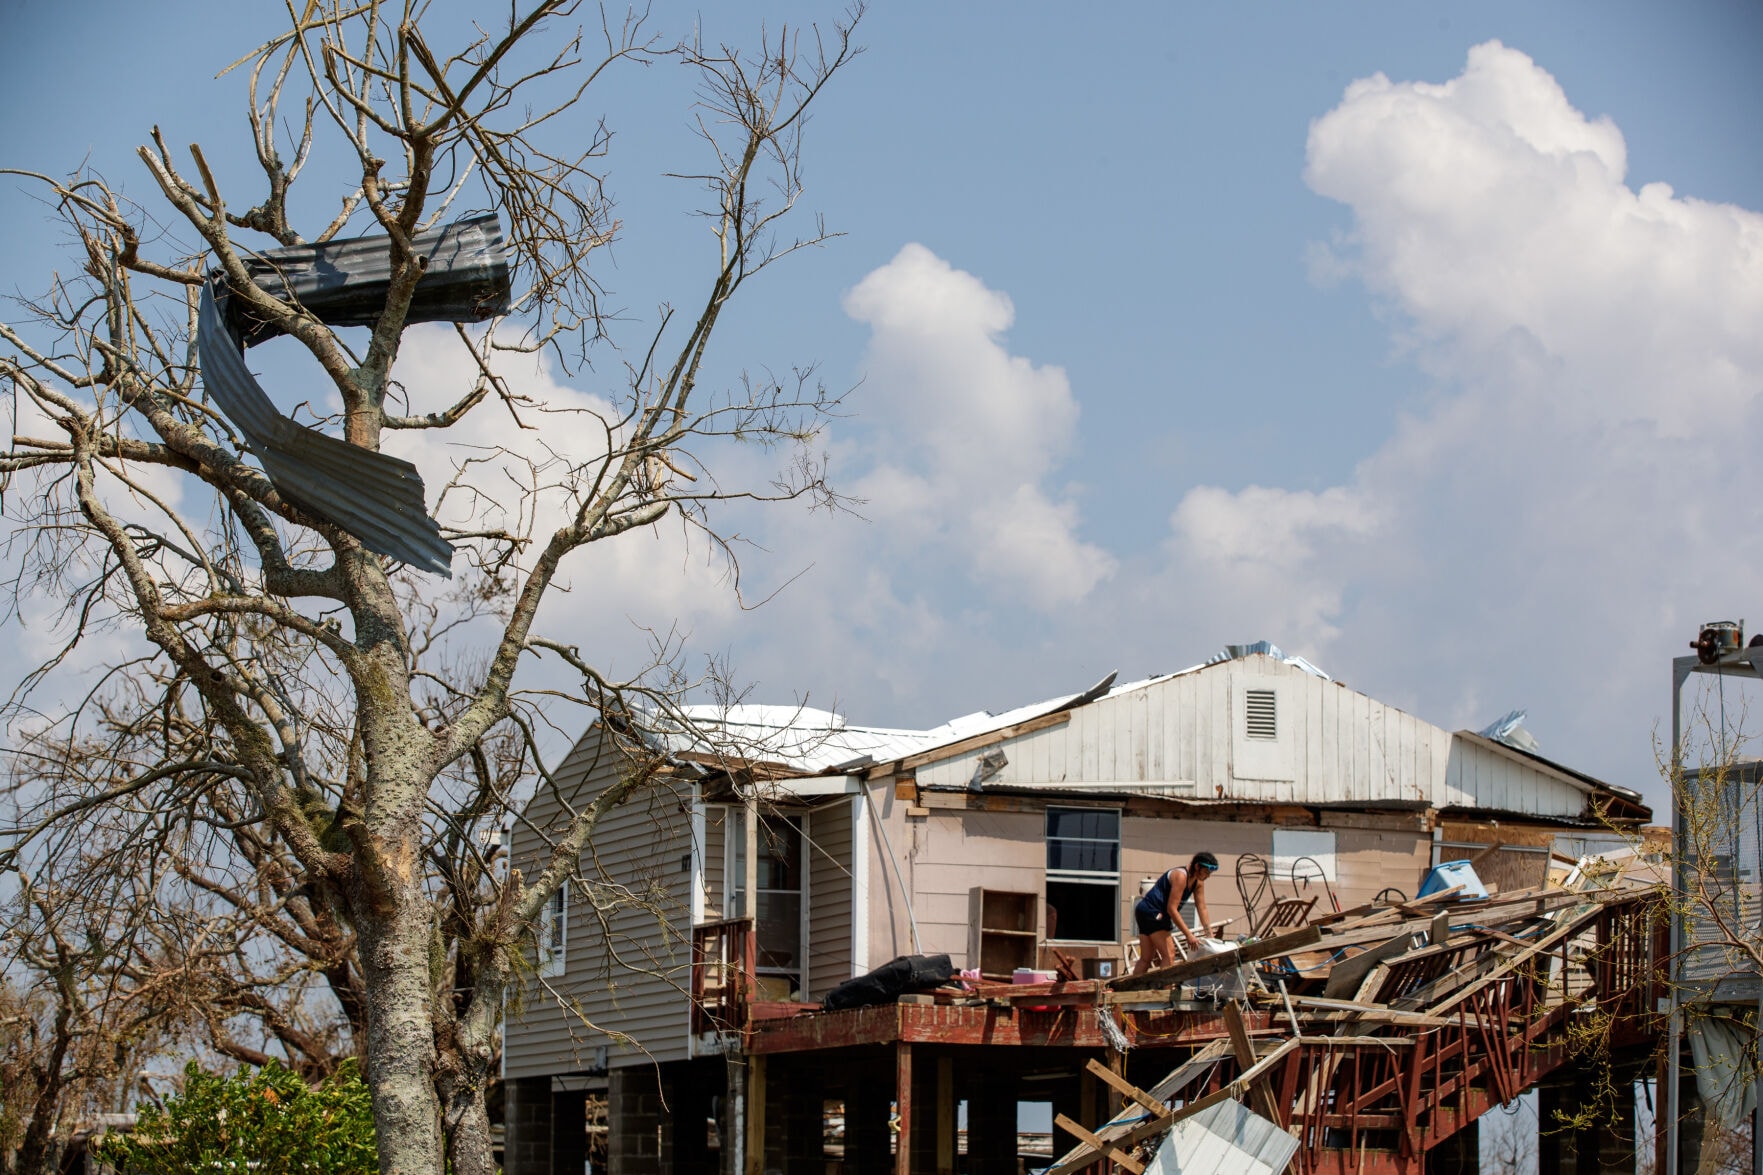 A person stands on the deck of a badly damaged house.